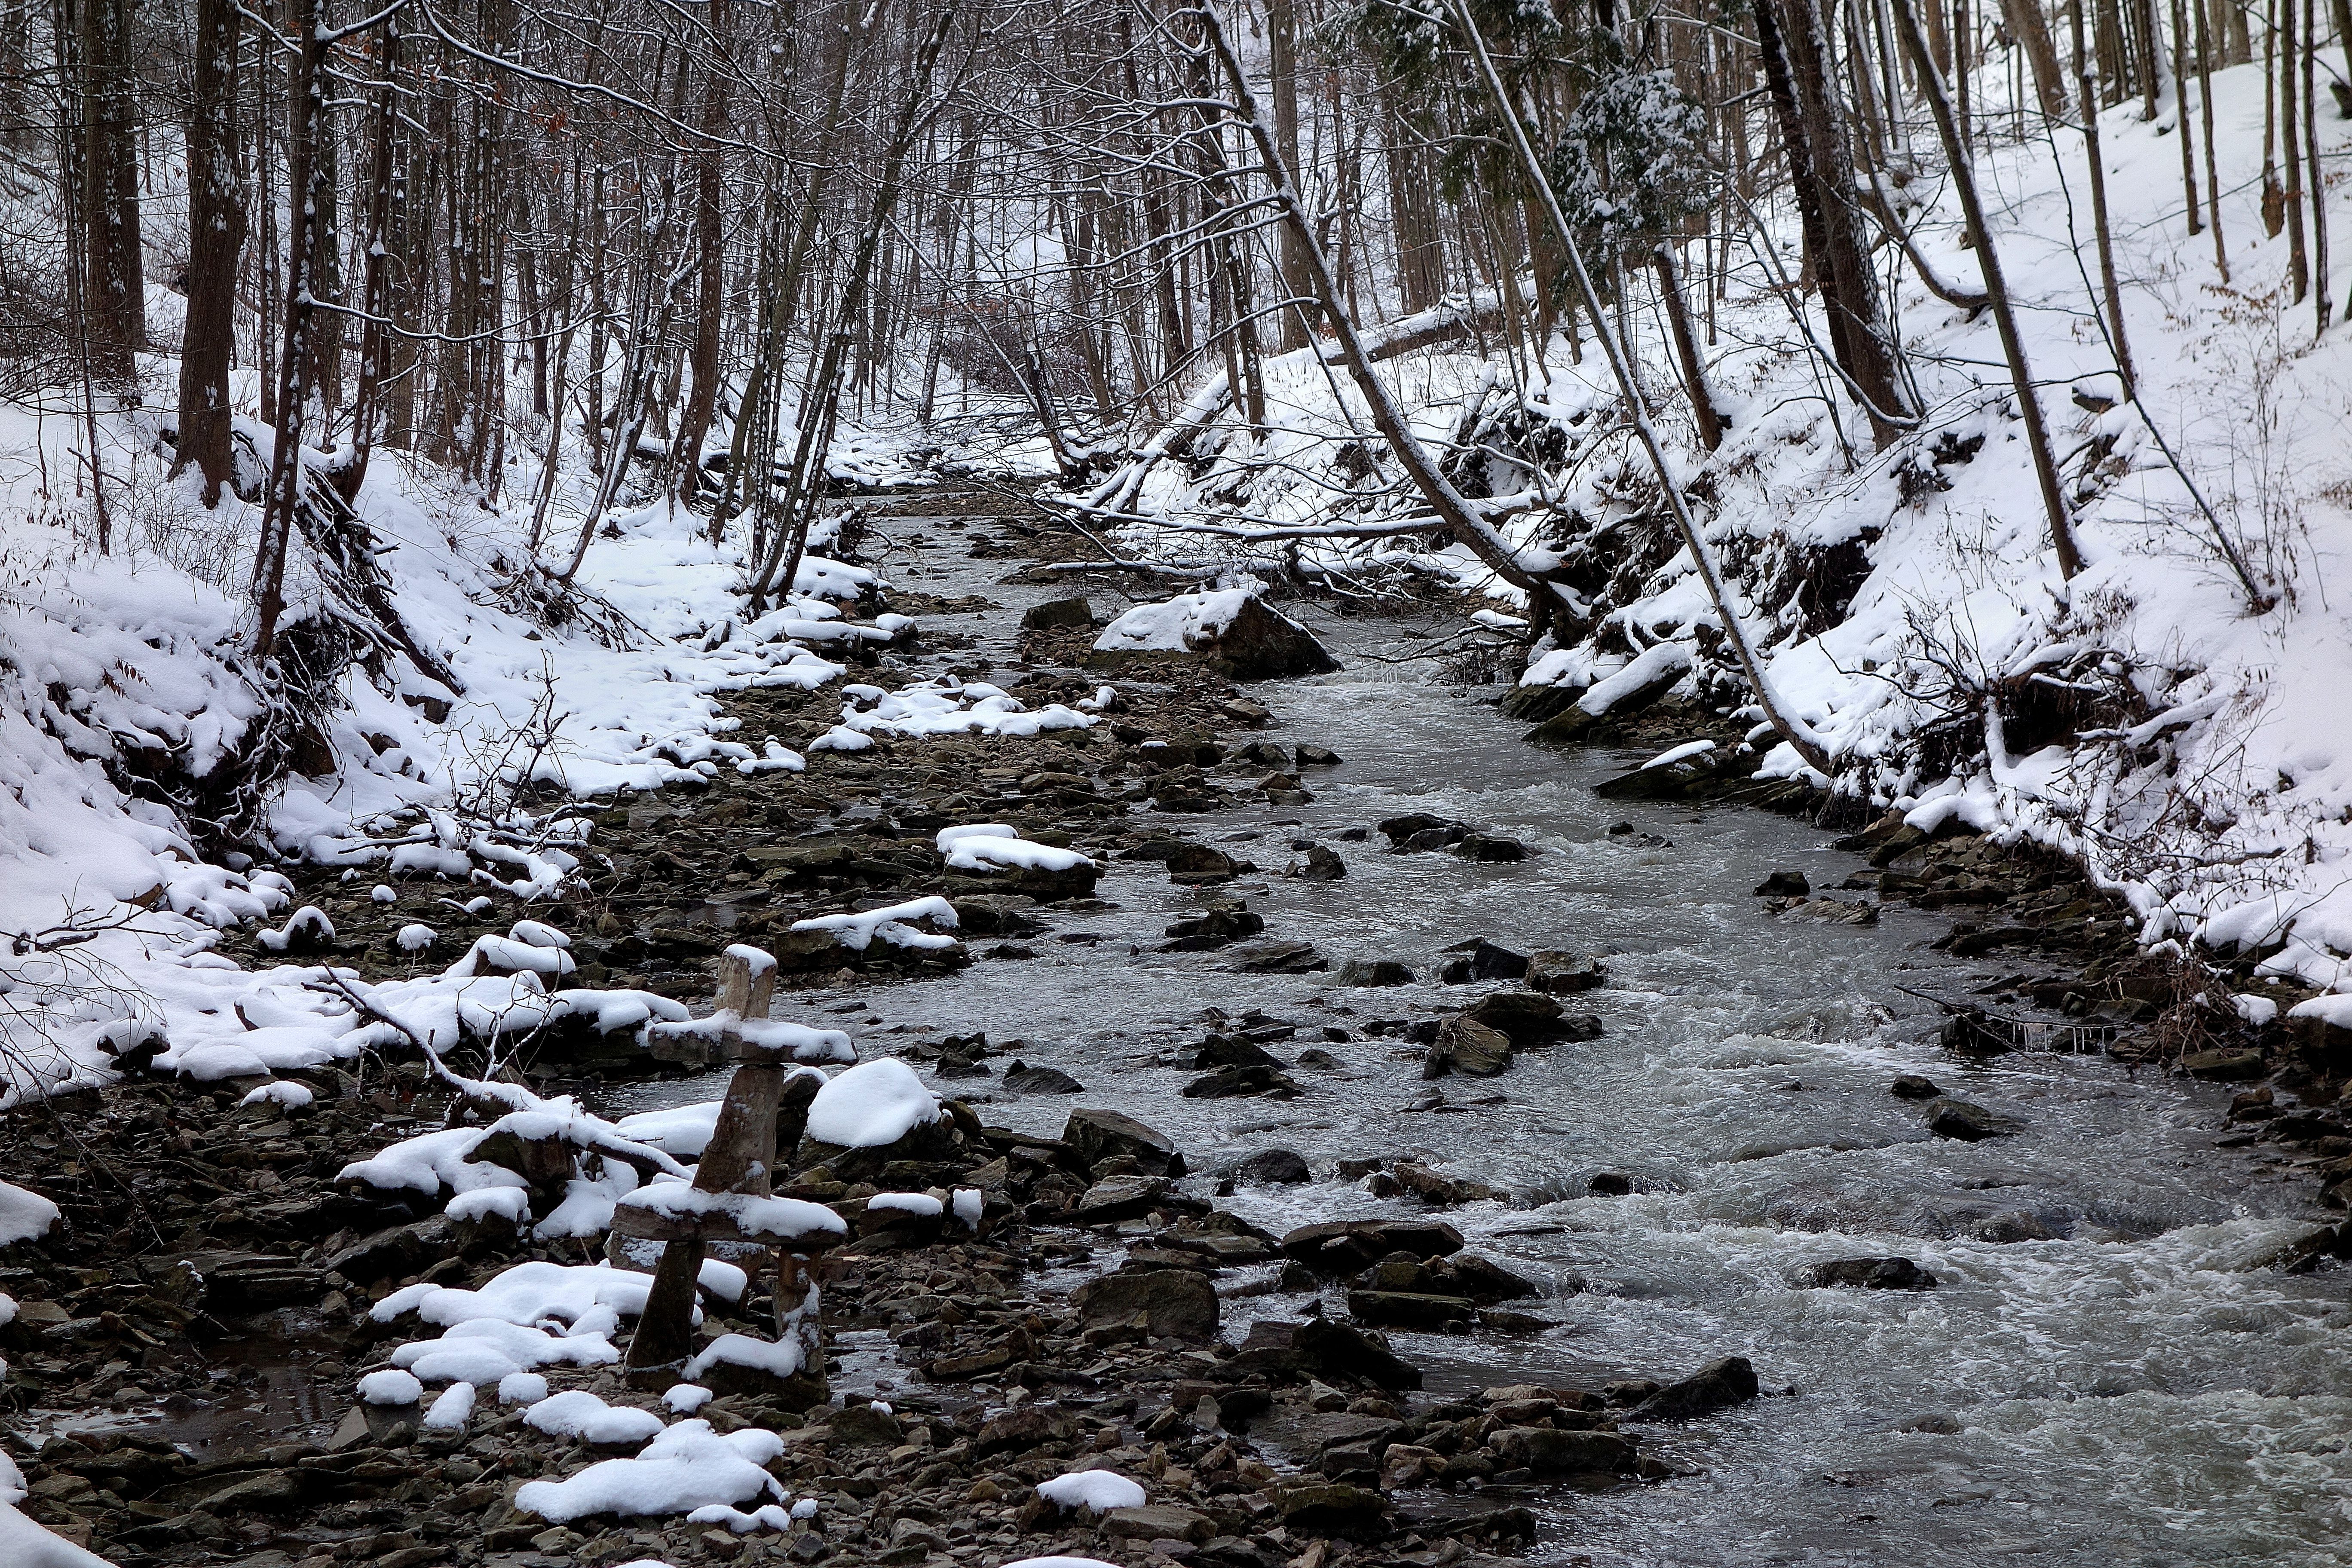 File:Red Hill Creek In The Winter.JPG - Wikimedia Commons